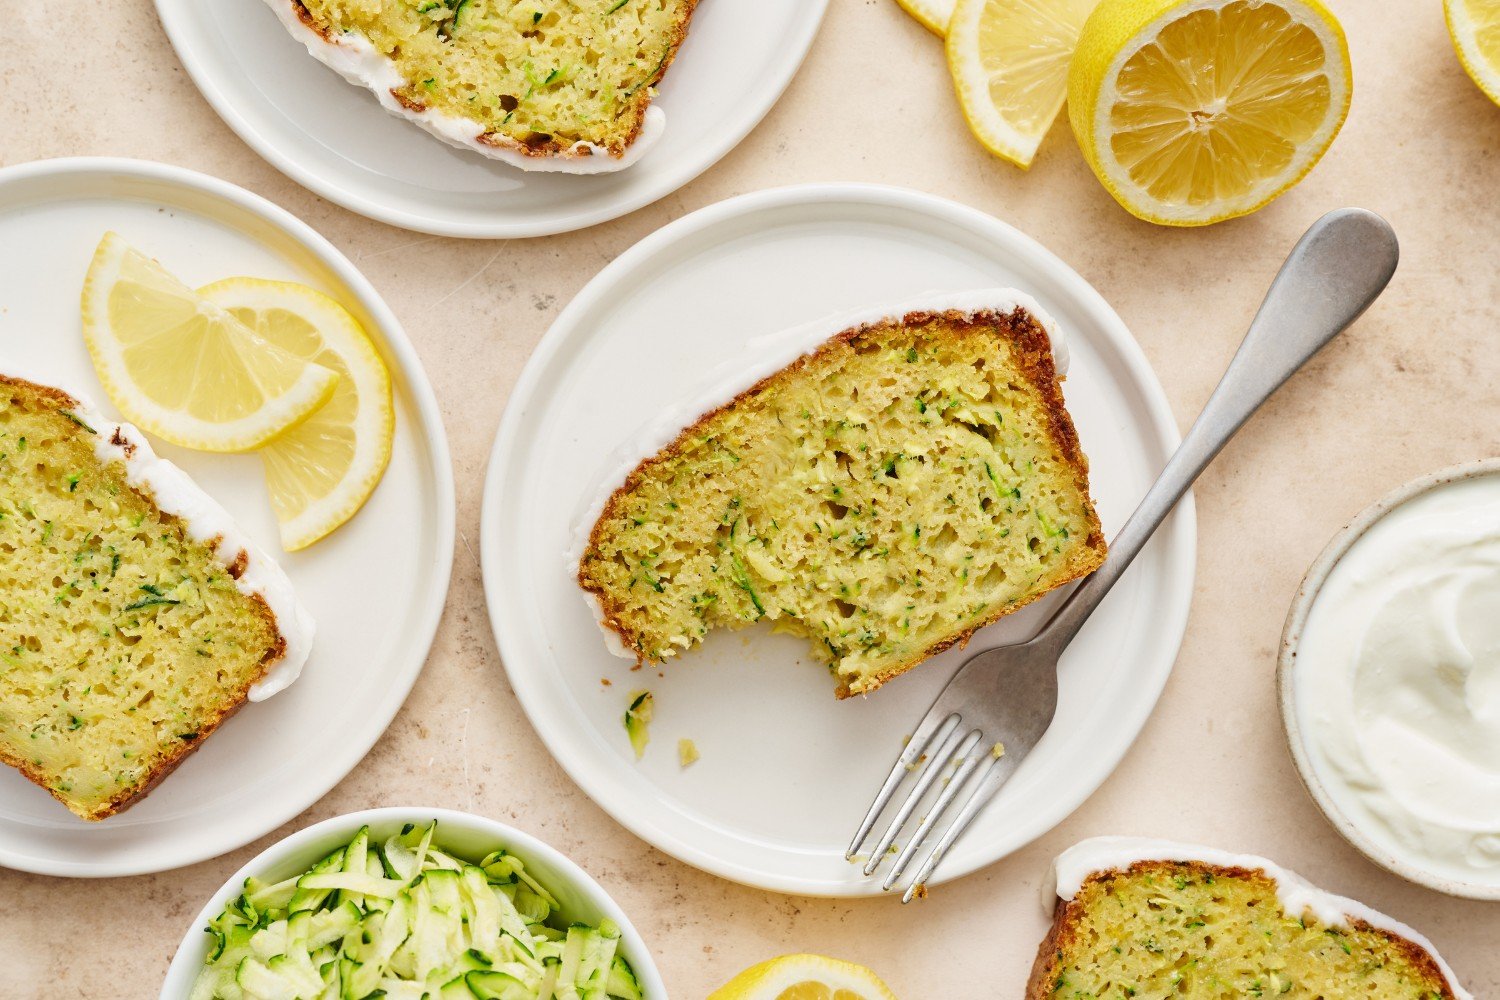 slices of lemon yogurt zucchini bread on a plate with forks, with one slice with a bite taken out.